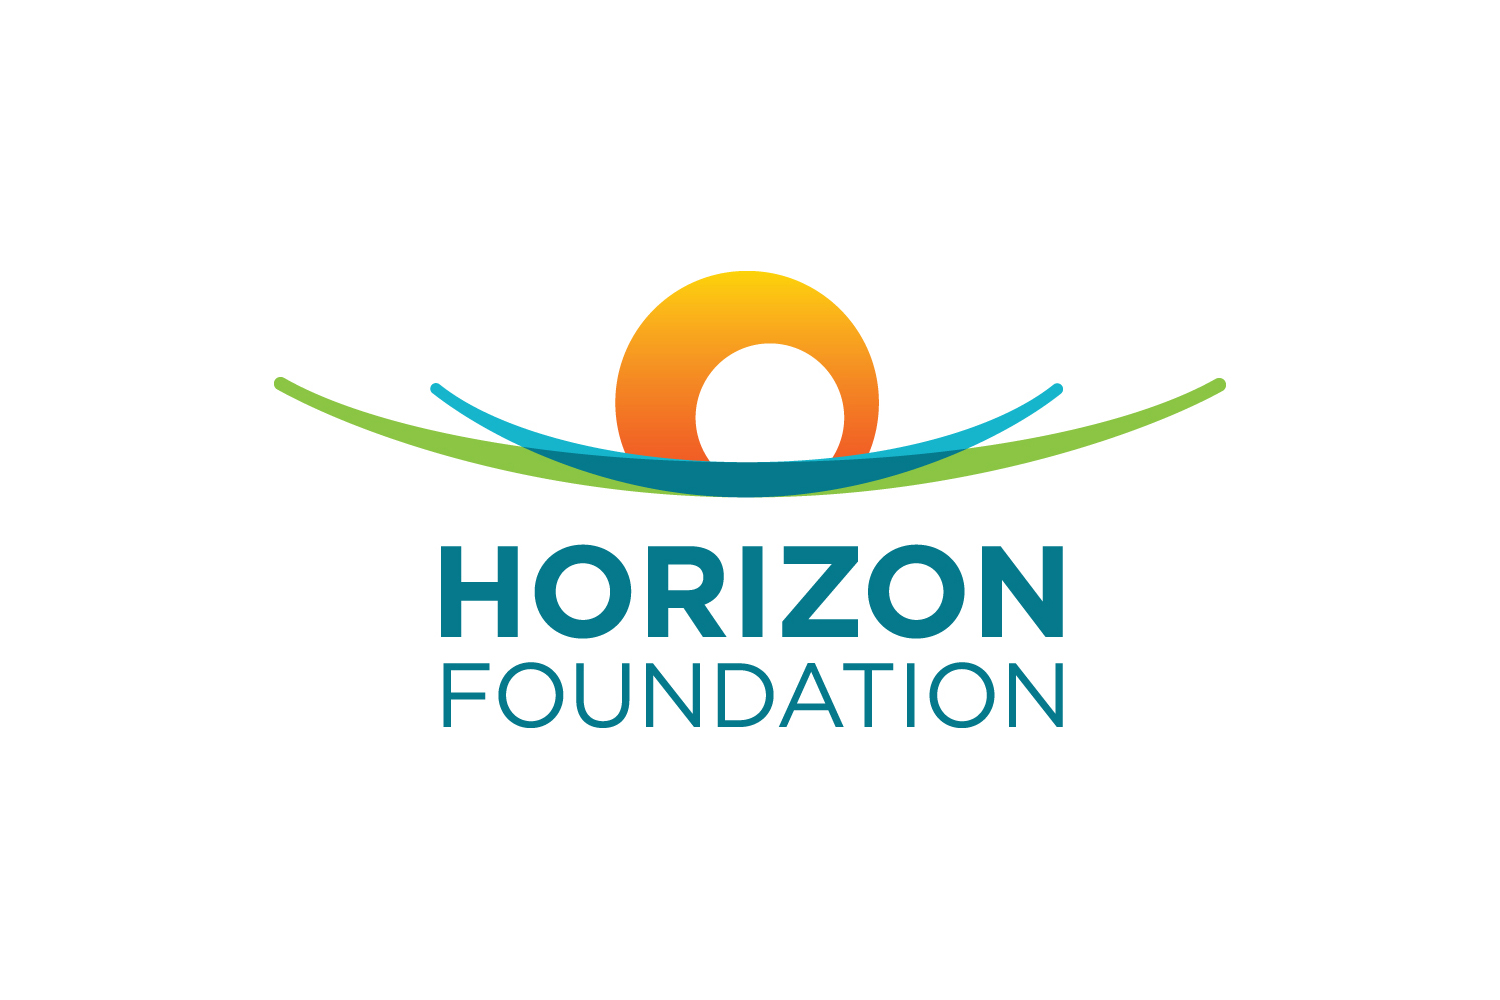 Horizon Foundation Announces Two New Staff Members: Jennifer Arice White and Kerry Darragh